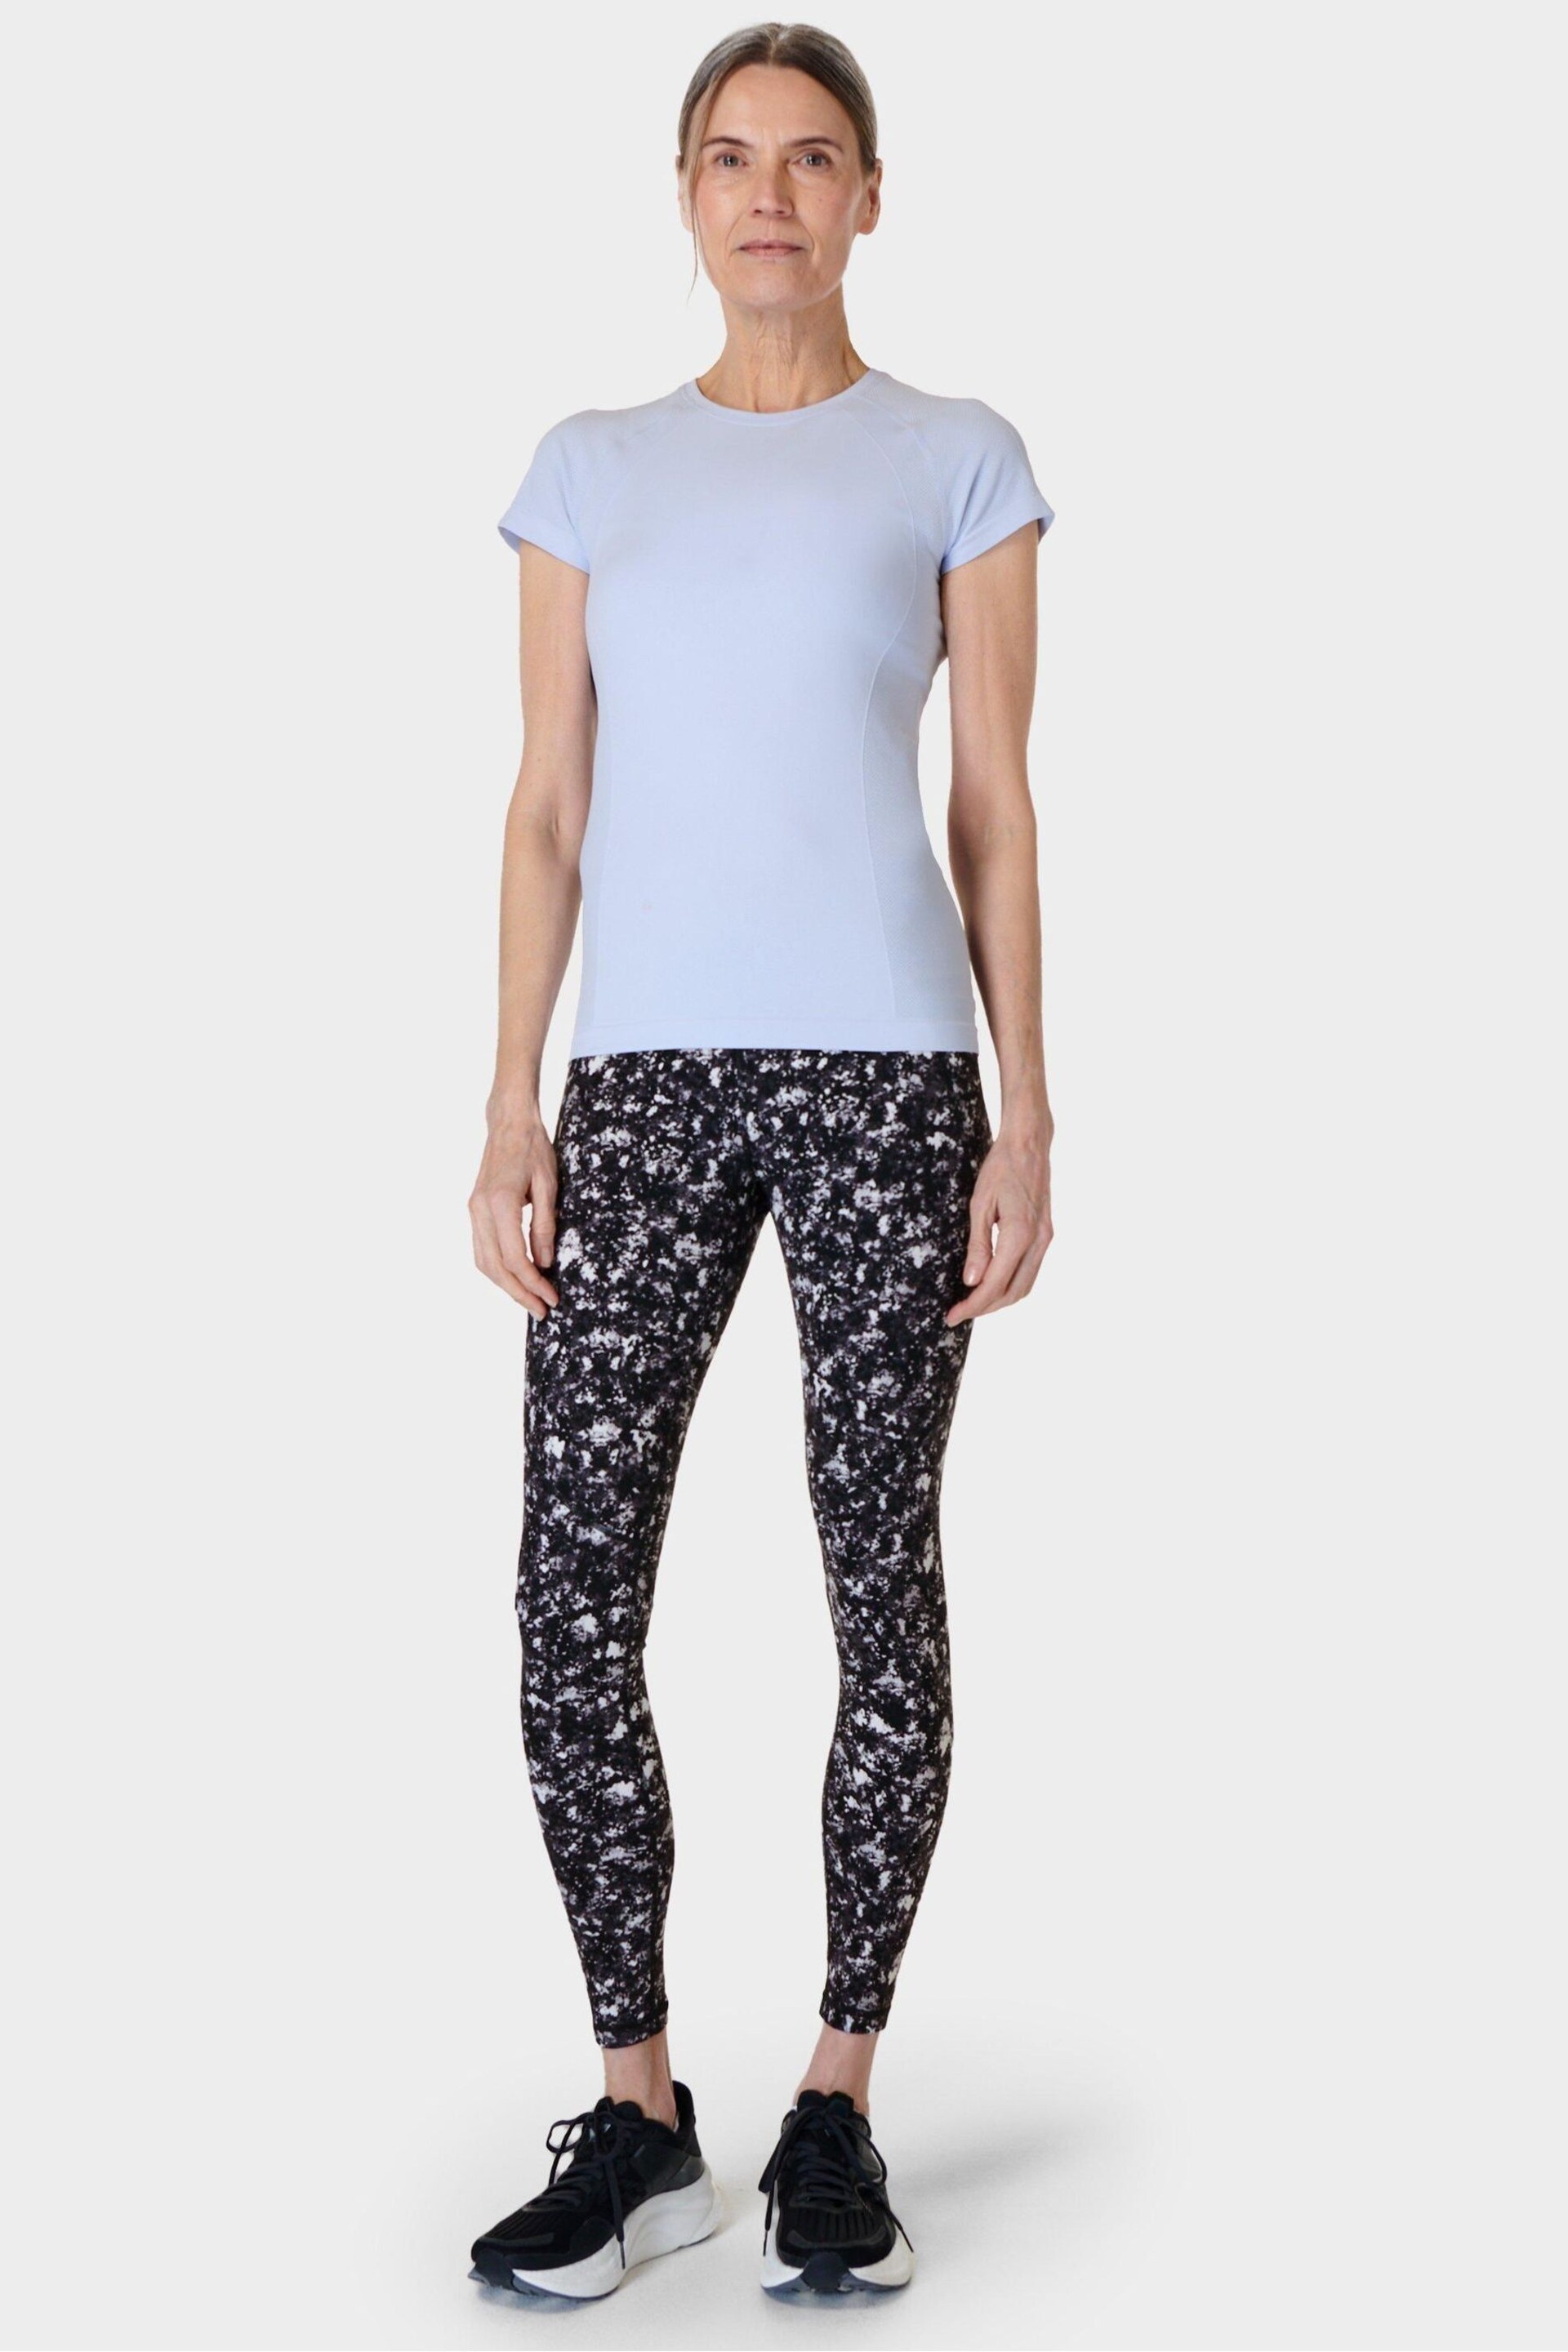 Sweaty Betty Black Electric Texture Print Full Length Power Workout Leggings - Image 4 of 10